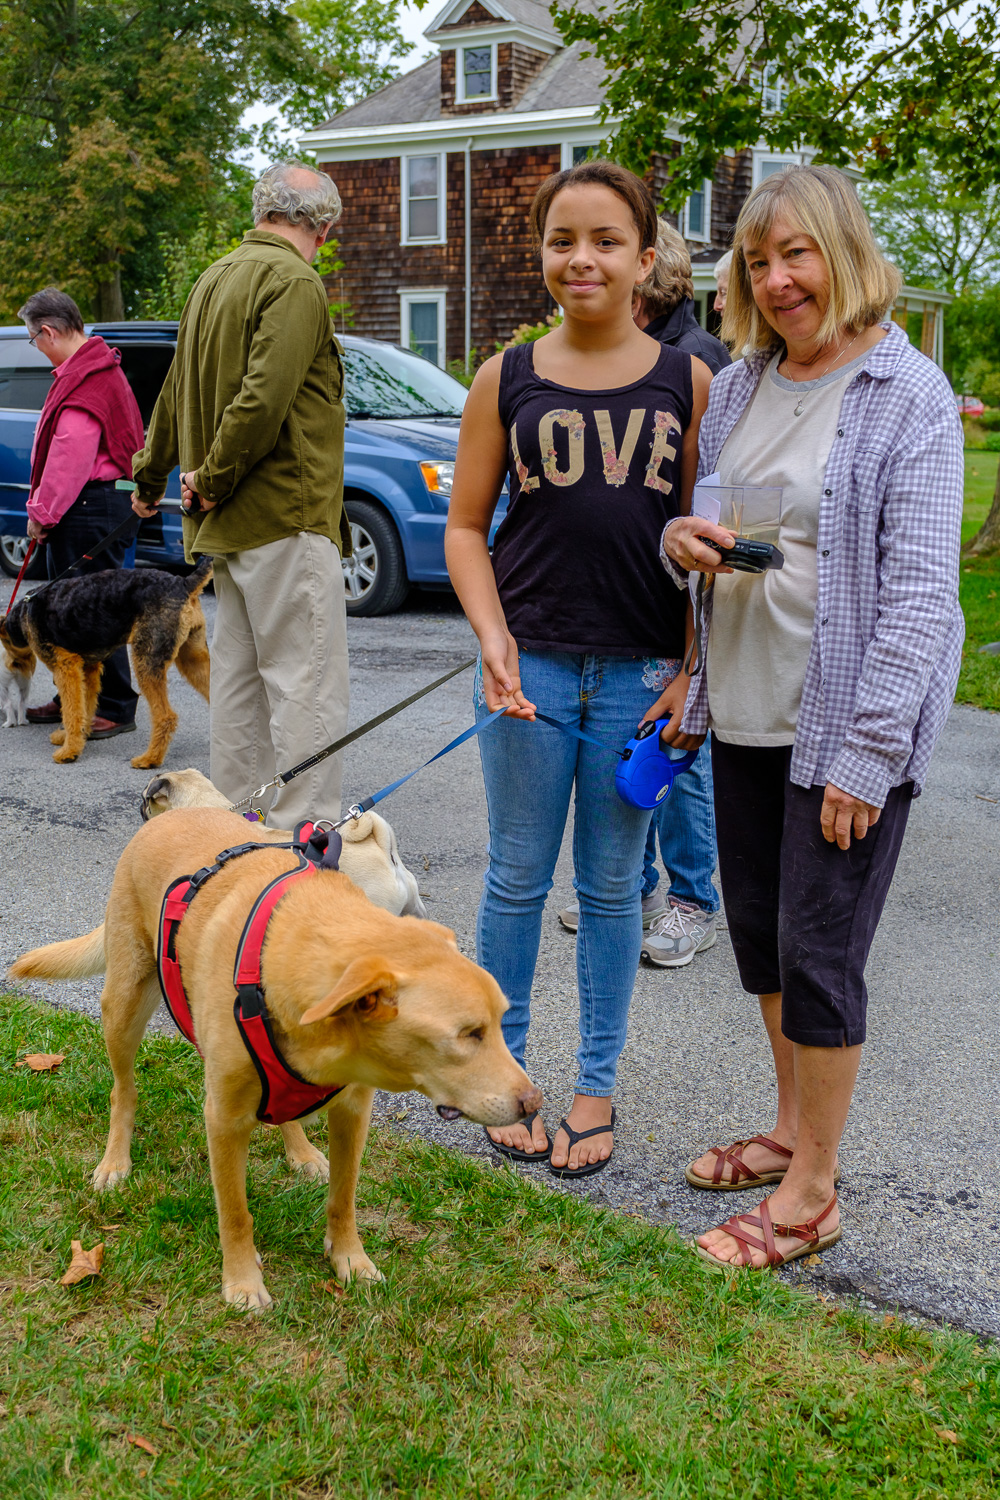 Ayda and Mary Ellen Terry of Orient with Jonah, their yellow lab. (Credit: Jeremy Garretson)